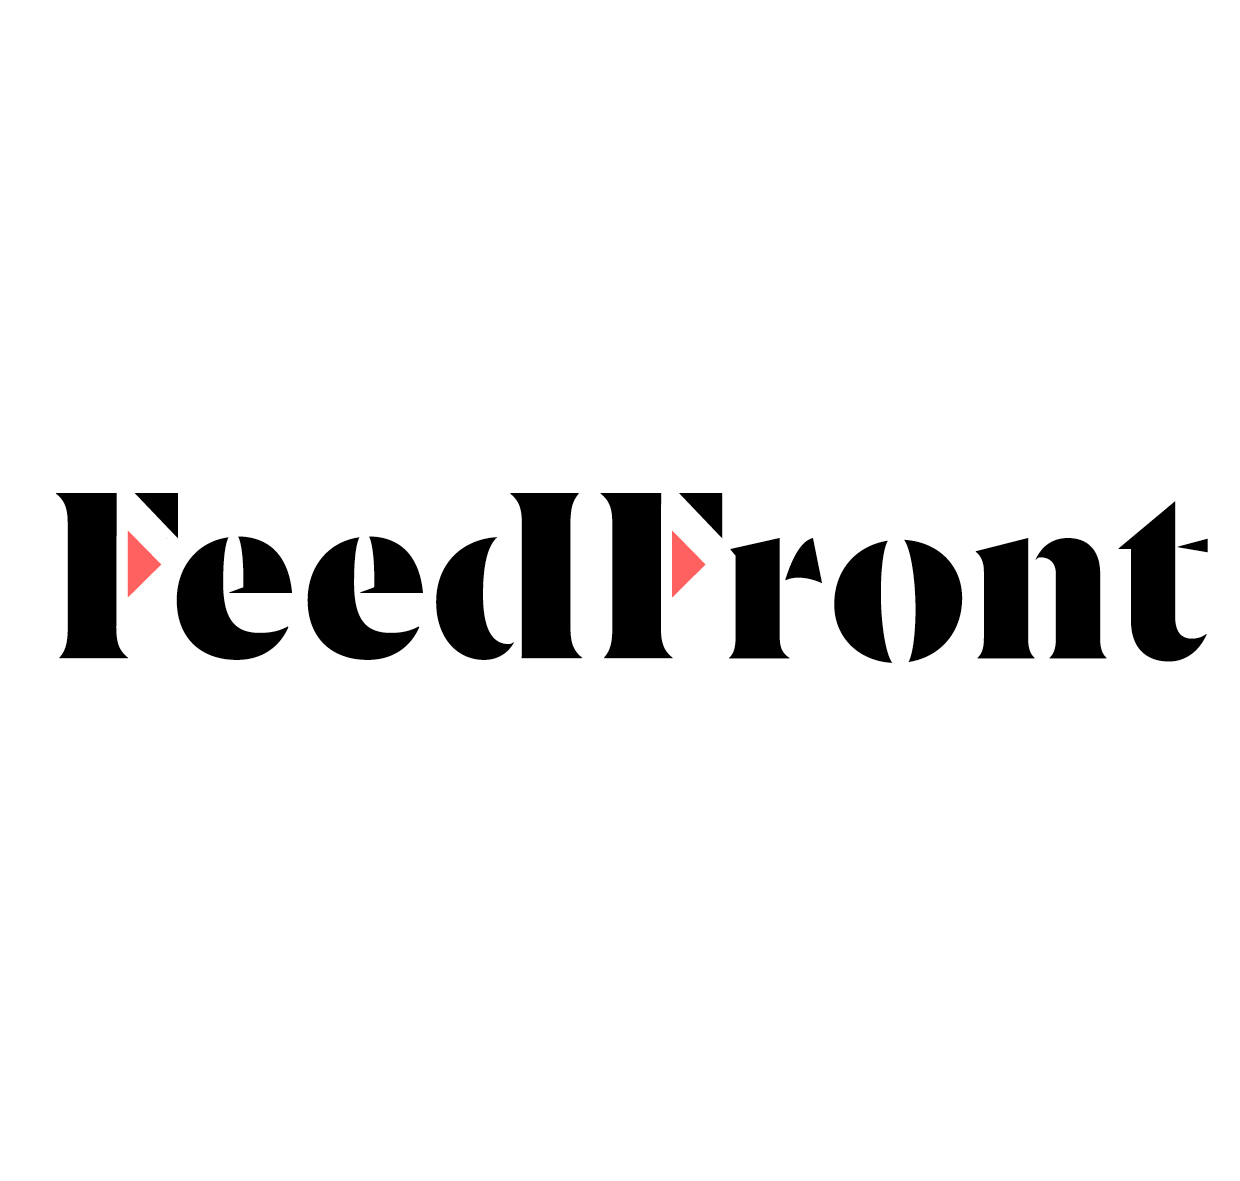 FeedFront logo design by logo designer James Daniel Design for your inspiration and for the worlds largest logo competition